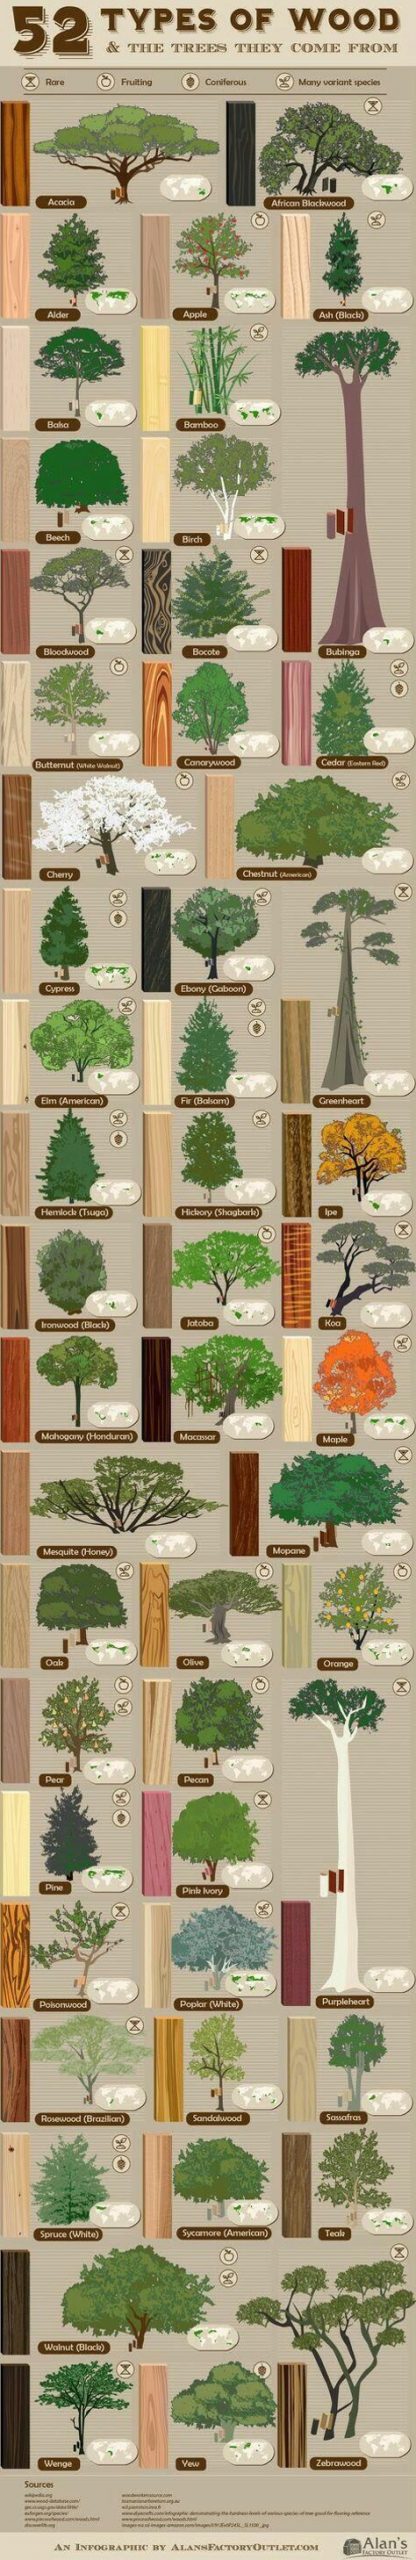 types of wood and the trees they come from